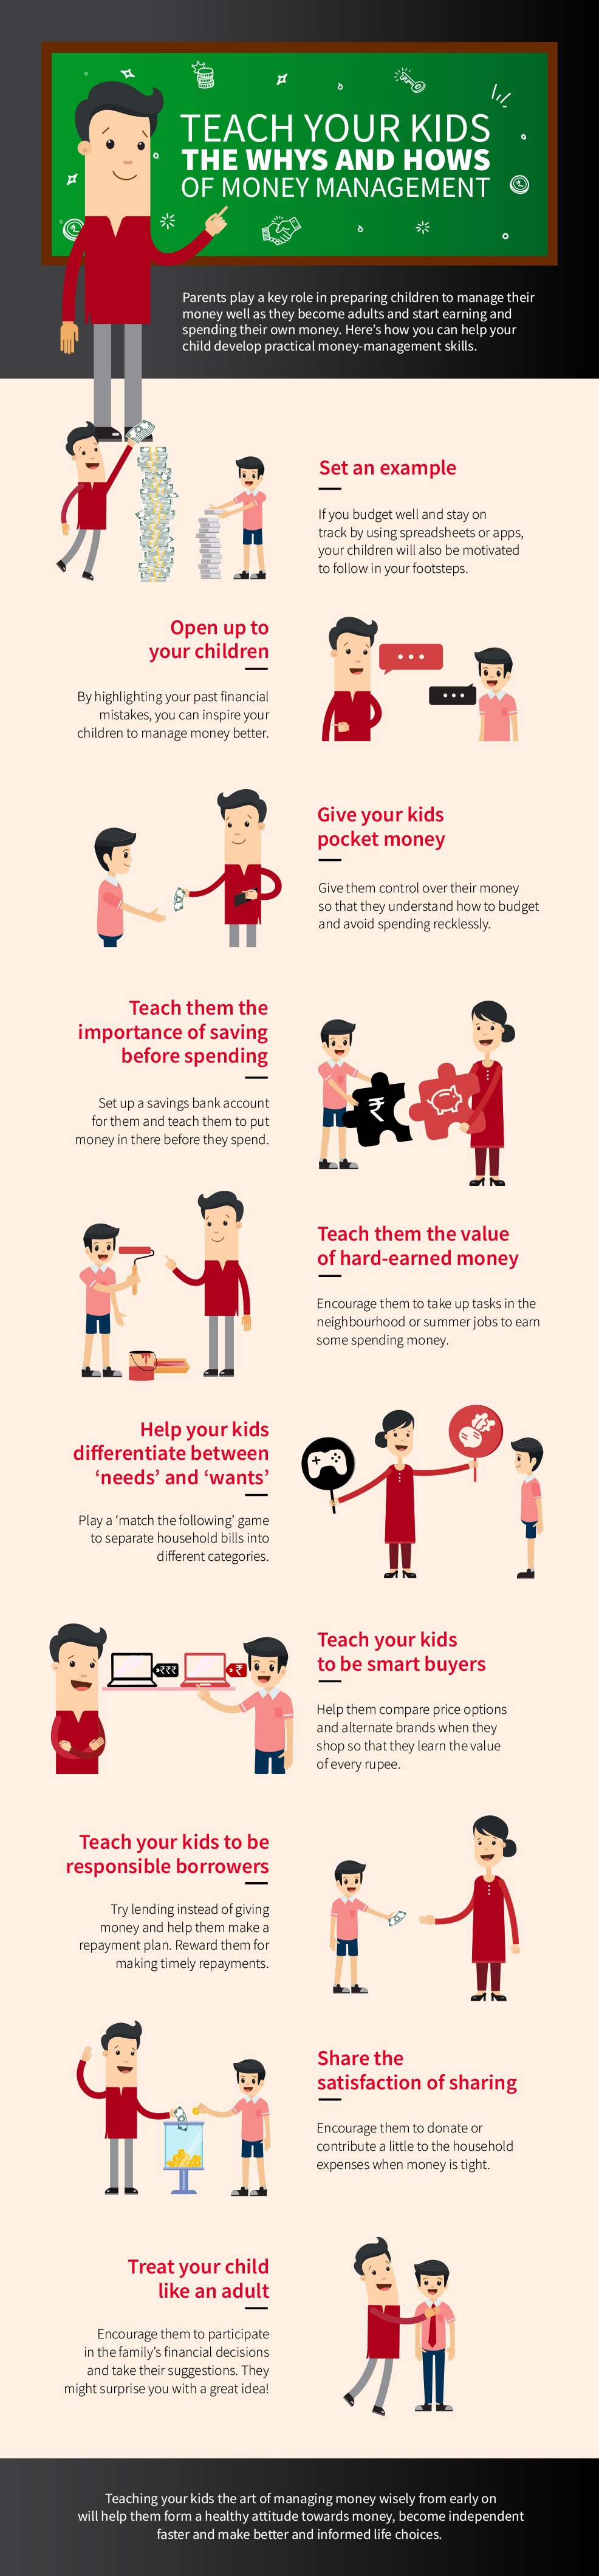 Teach your kids the whys and hows of money management